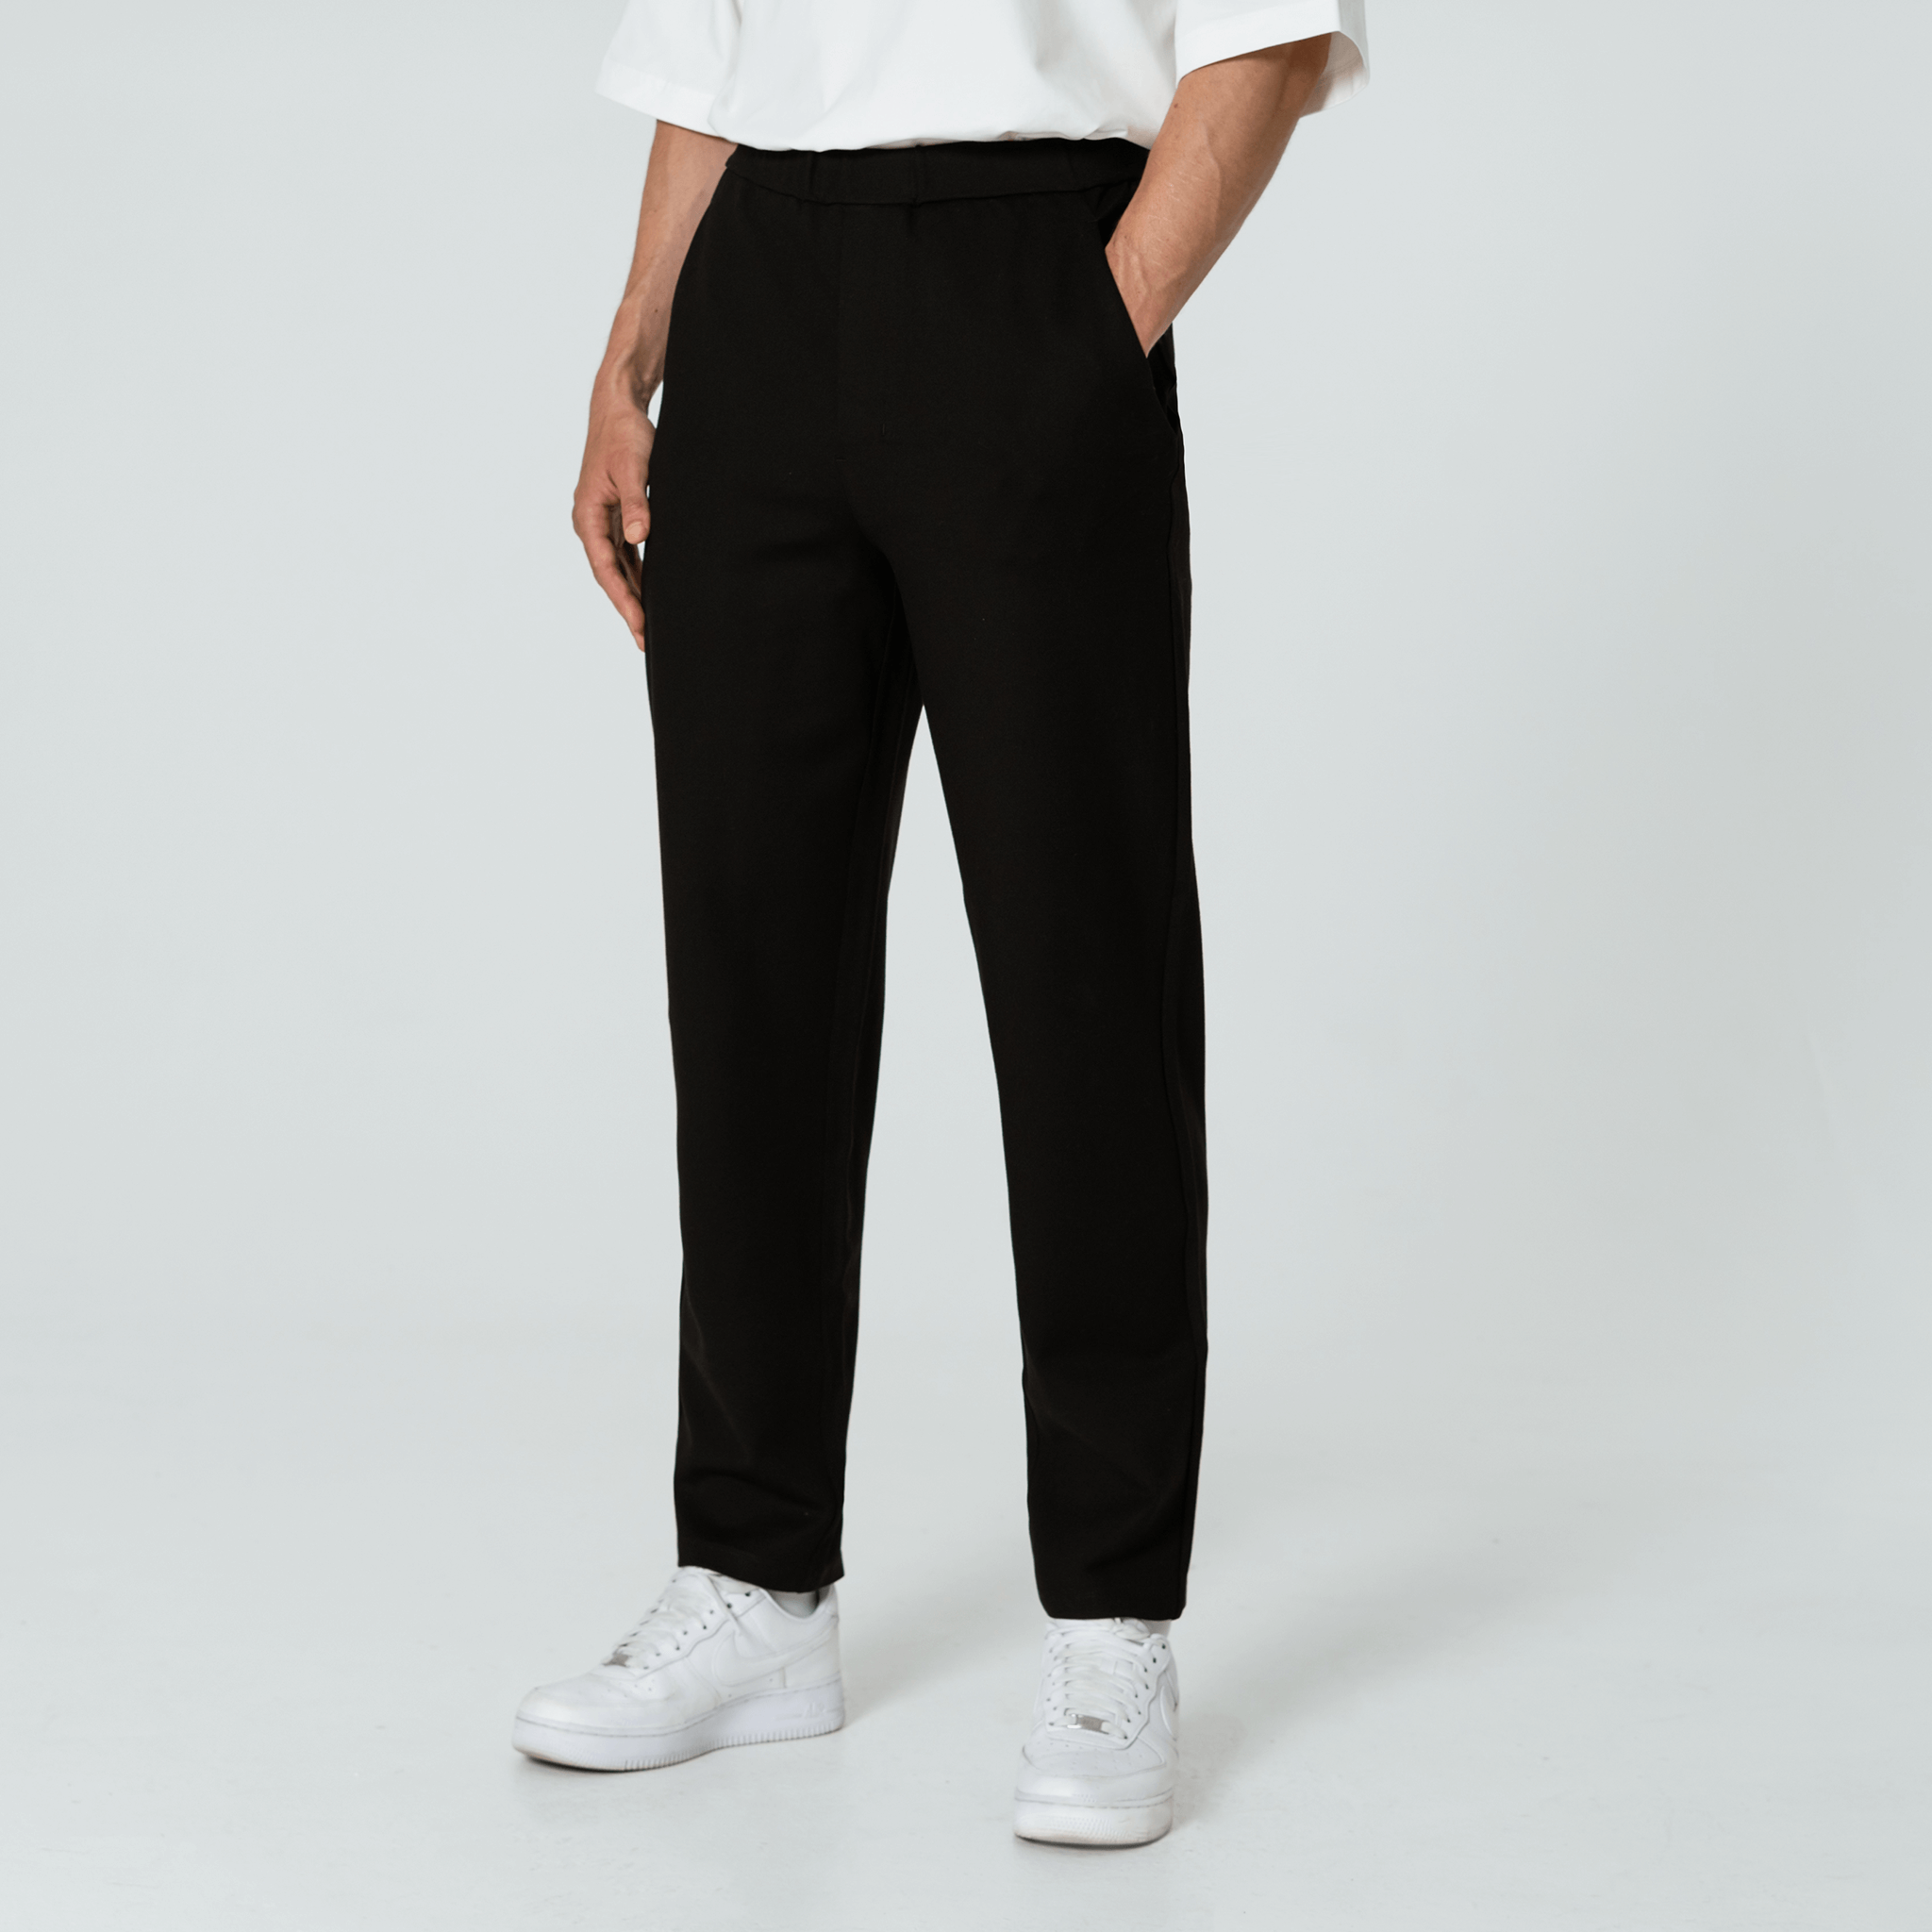 SOCRATES CLASSIC PANT – NOTHINGS SOMETHING